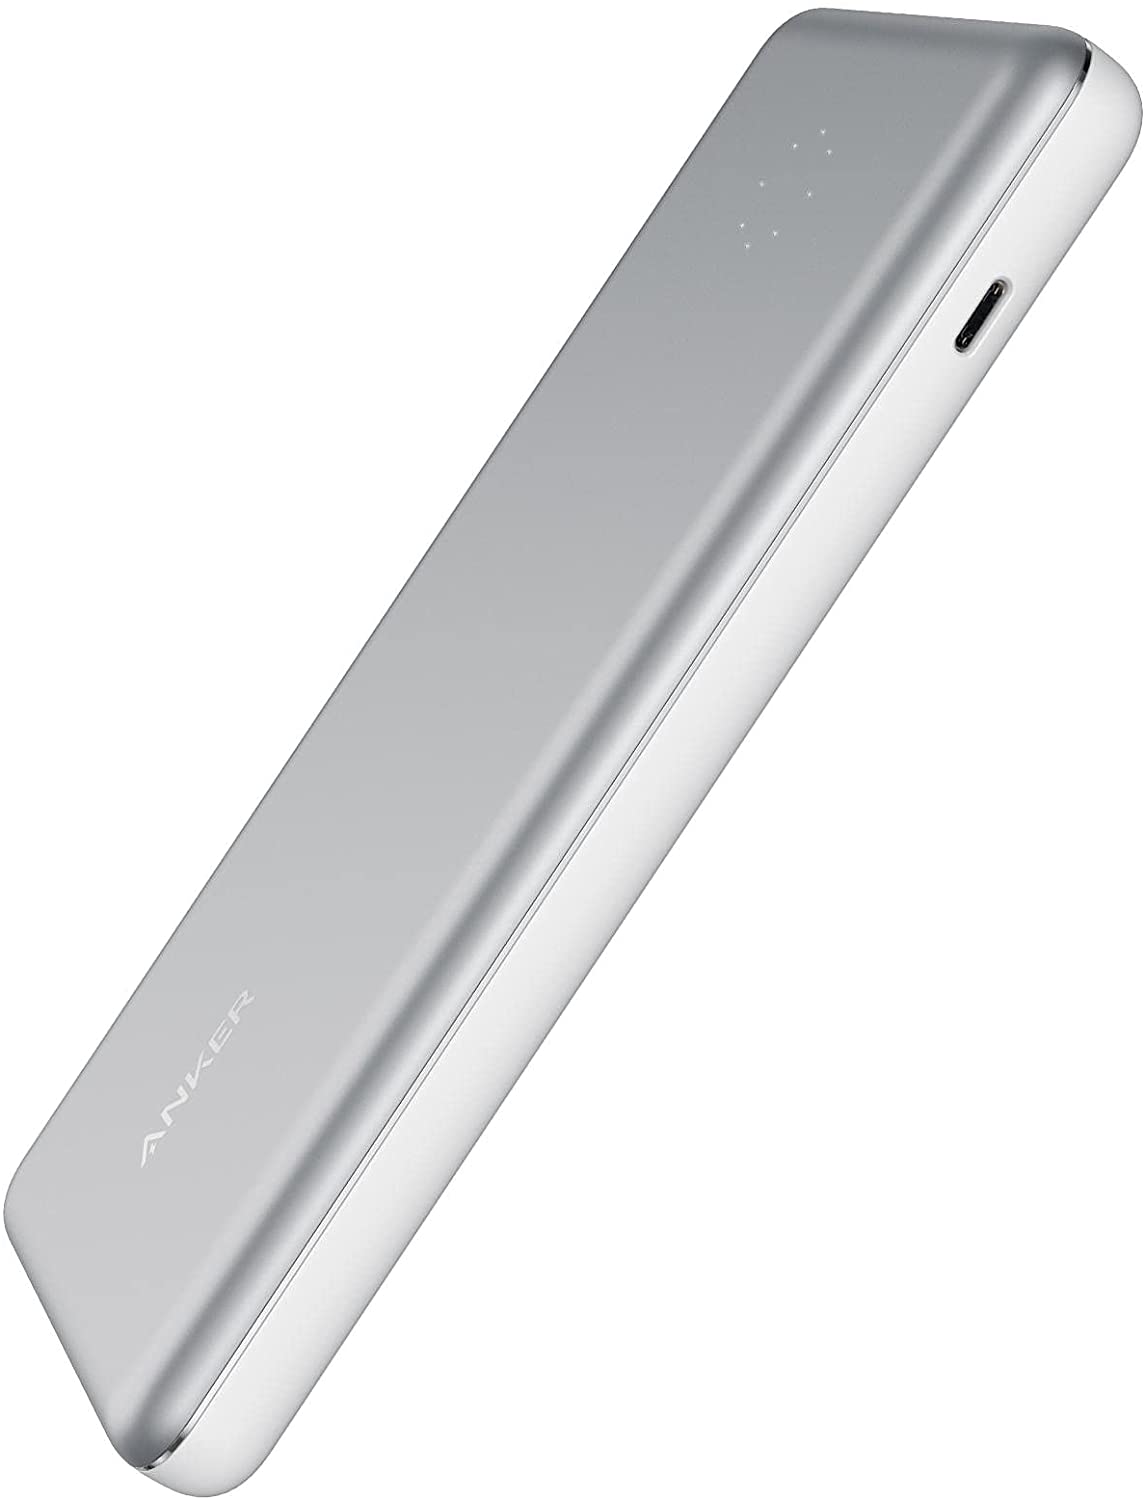 Prime Member Exclusive: Anker PowerCore+ 10000 Pro High Speed Charging Portable Charger Battery Pack (White) $19.99 + Free Shipping w/ Prime or orders $25+